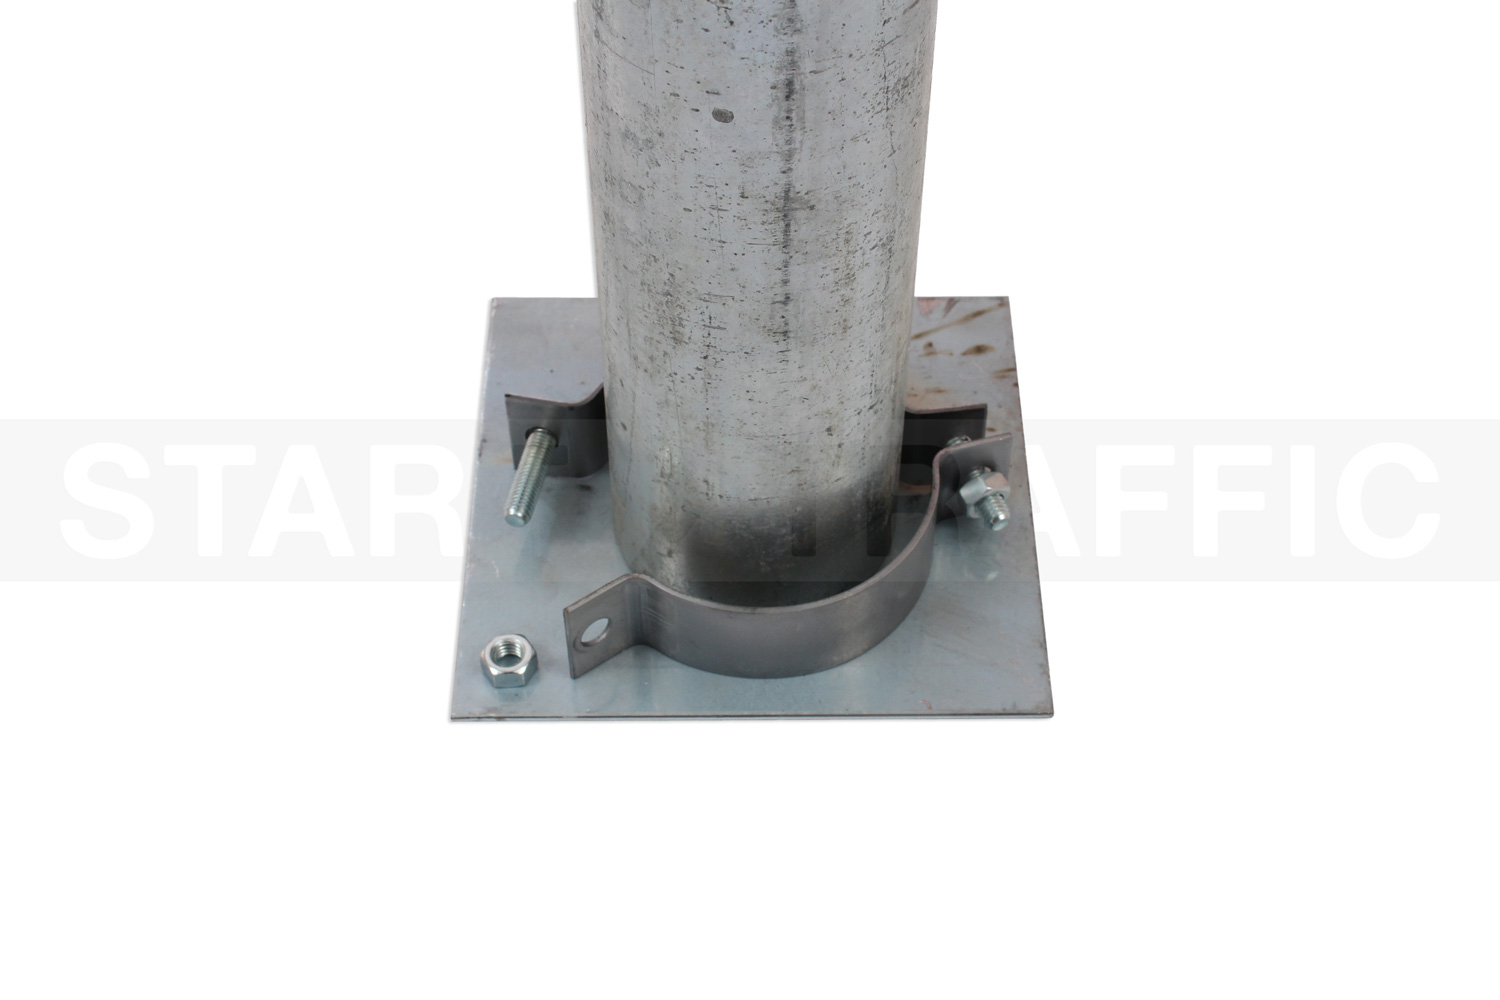 76mm post in base plate